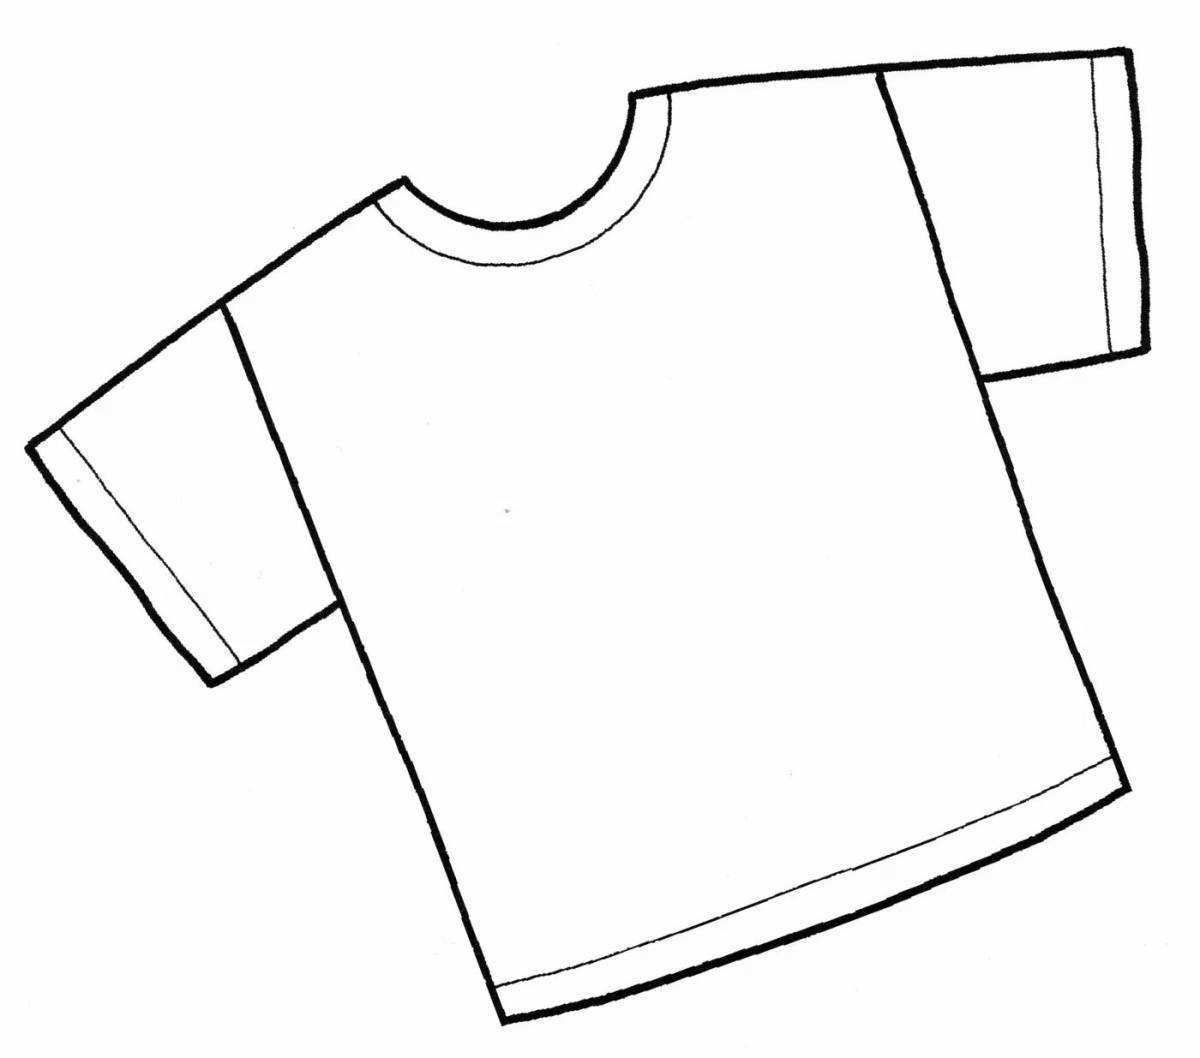 Colourful coloring t-shirt for a boy